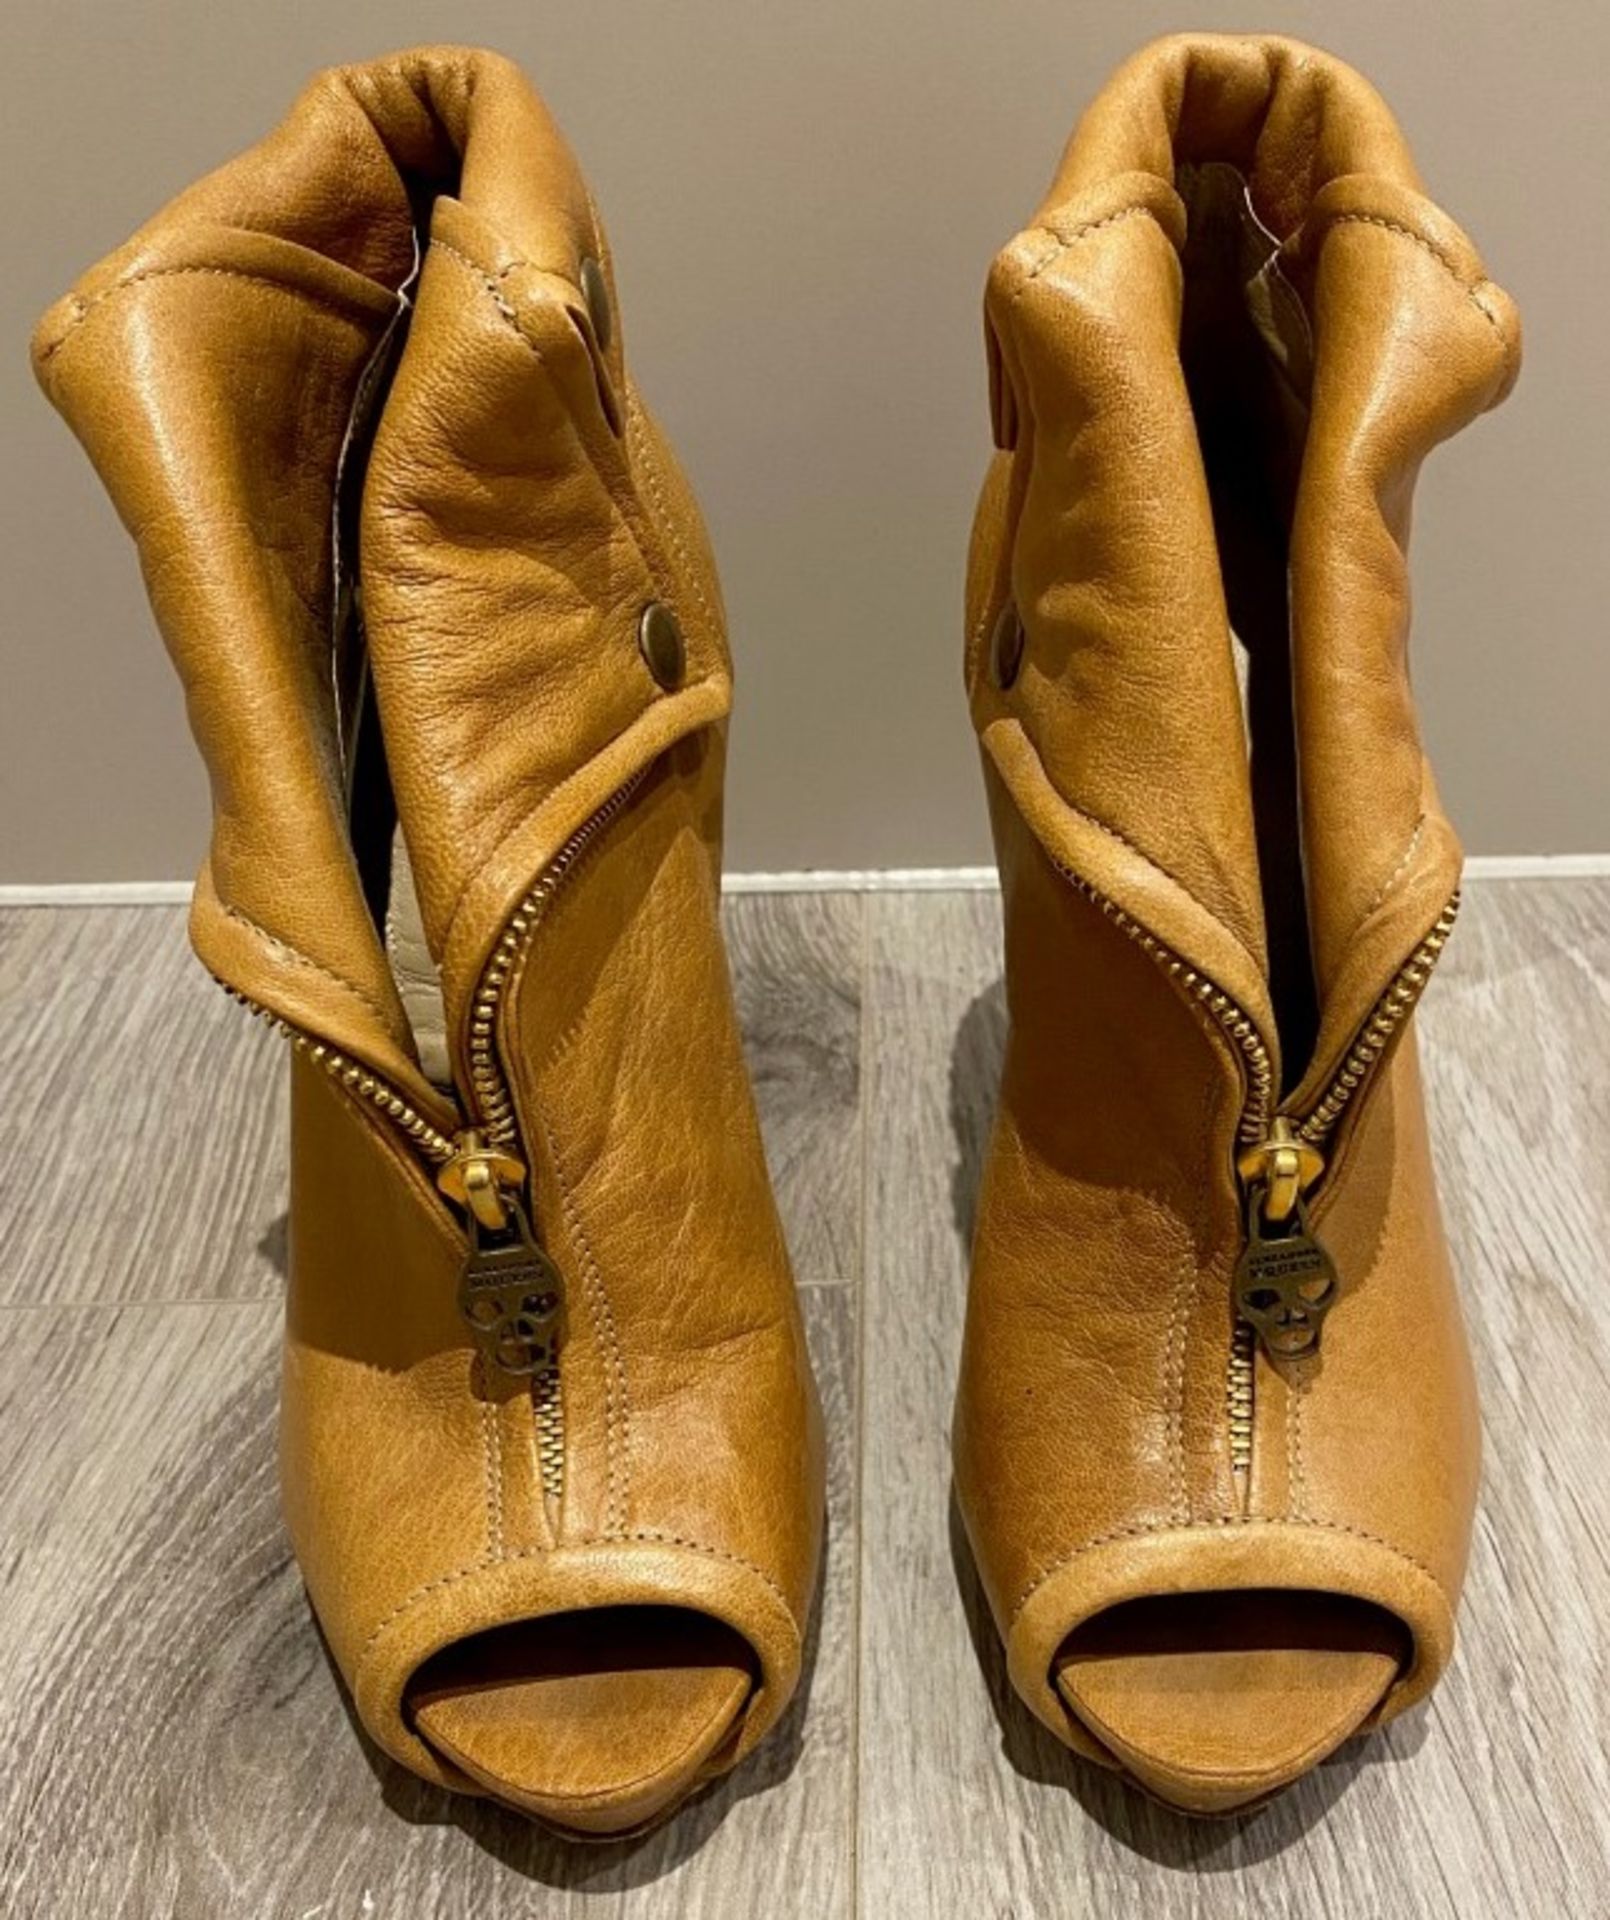 1 x Pair Of Genuine Alexander Mcqueen High Heel Shoes In Tan - Size: 37 - Preowned in Very Good - Image 4 of 4